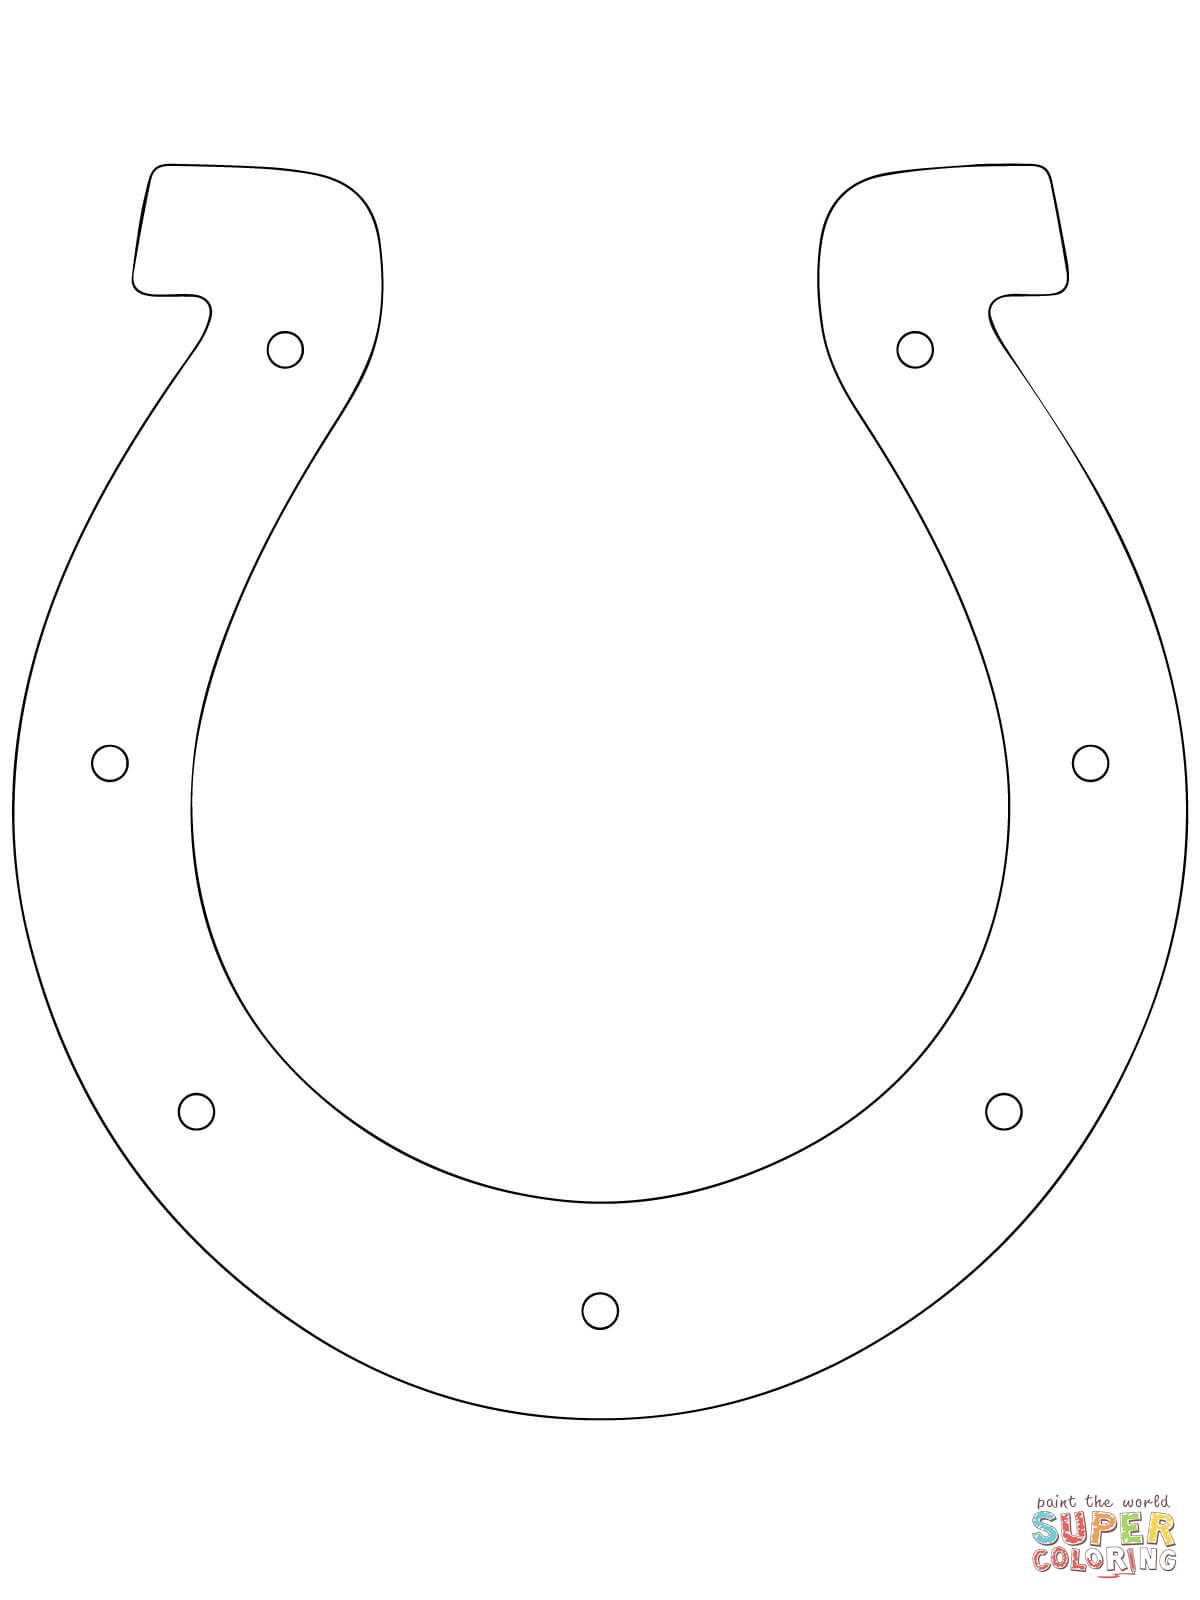 Horseshoe Outline | Super Coloring | Crafts For Kids | Pinterest - Free Printable Horseshoe Coloring Pages